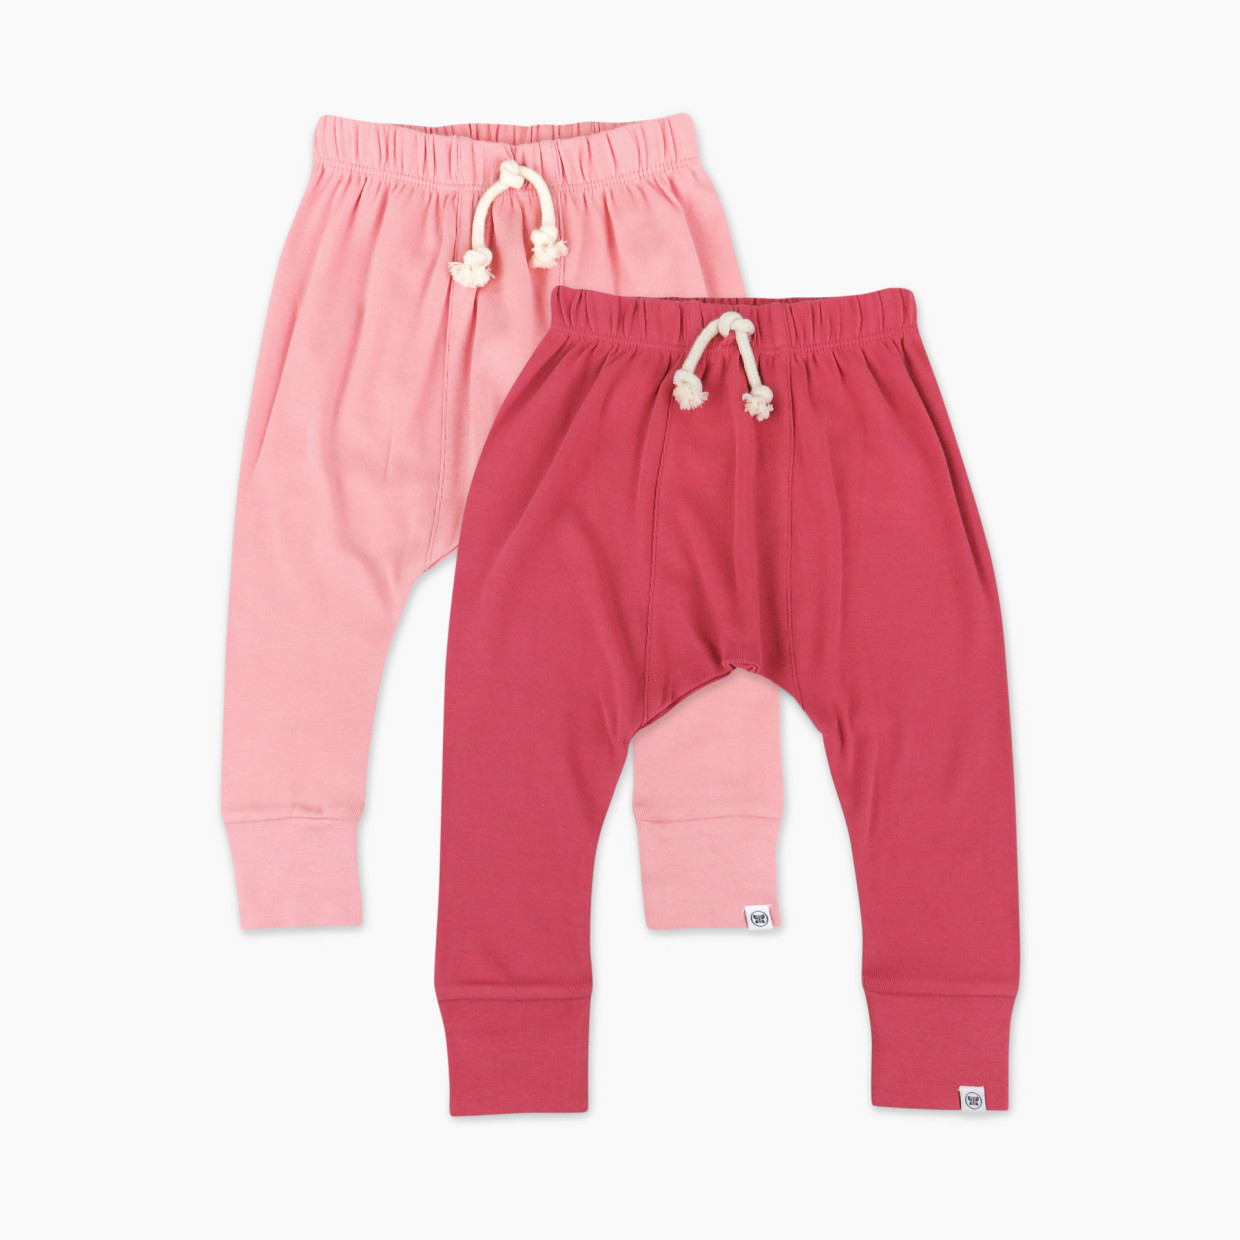 Honest Baby Clothing 2-Pack Organic Cotton Honest Pants - Pink Ombre, 0-3 M.